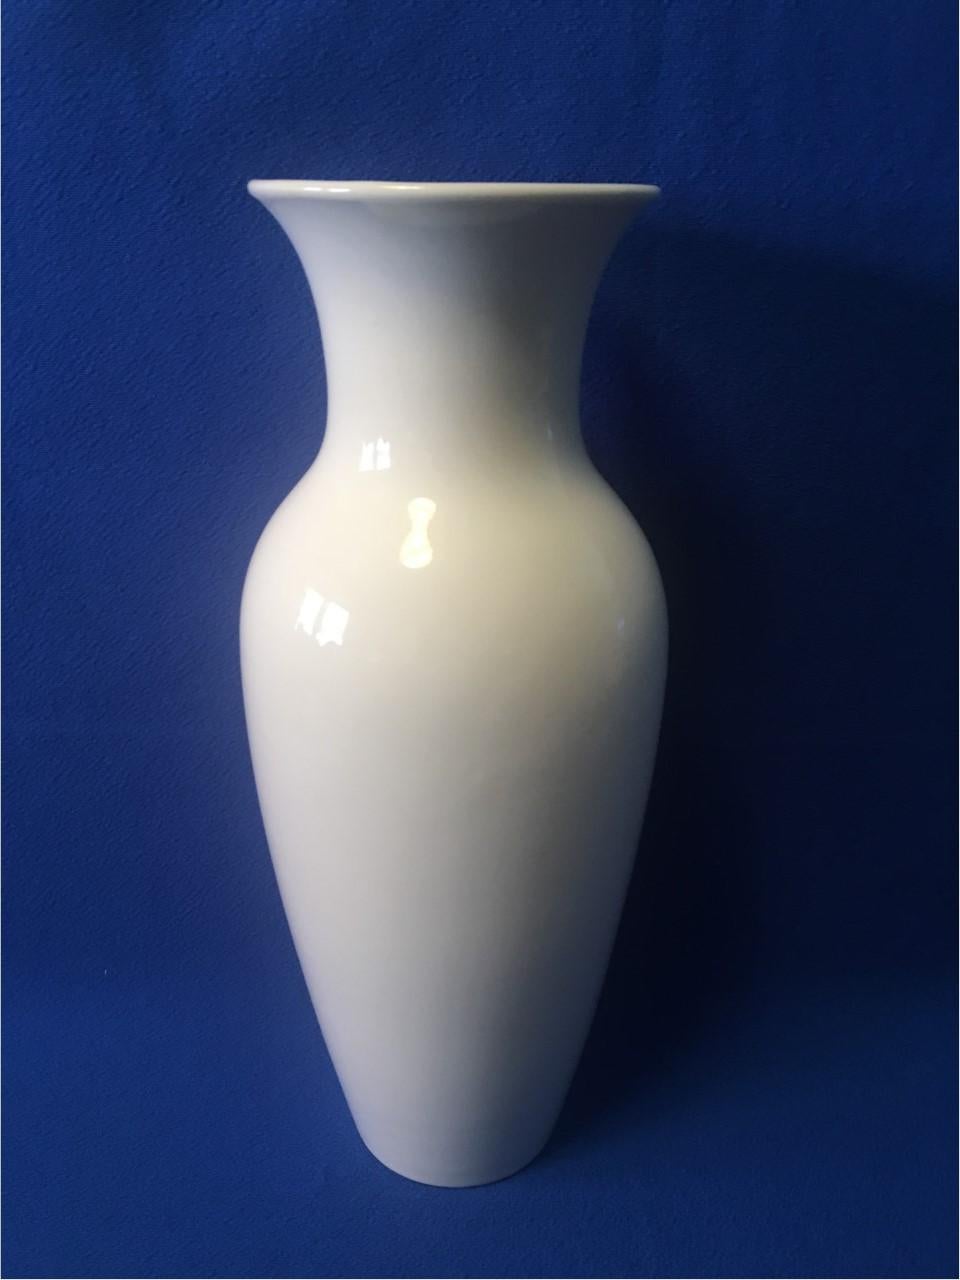 A lovely large Vase from the Royal Porcelain Manufacturing Company Berlin (K.P.M). It is complete with the Scepter Mark and the Year stamp of Z indicating manufactured in 1925. K.P.M Berlin is the second oldest Porcelain manufacturing Company in